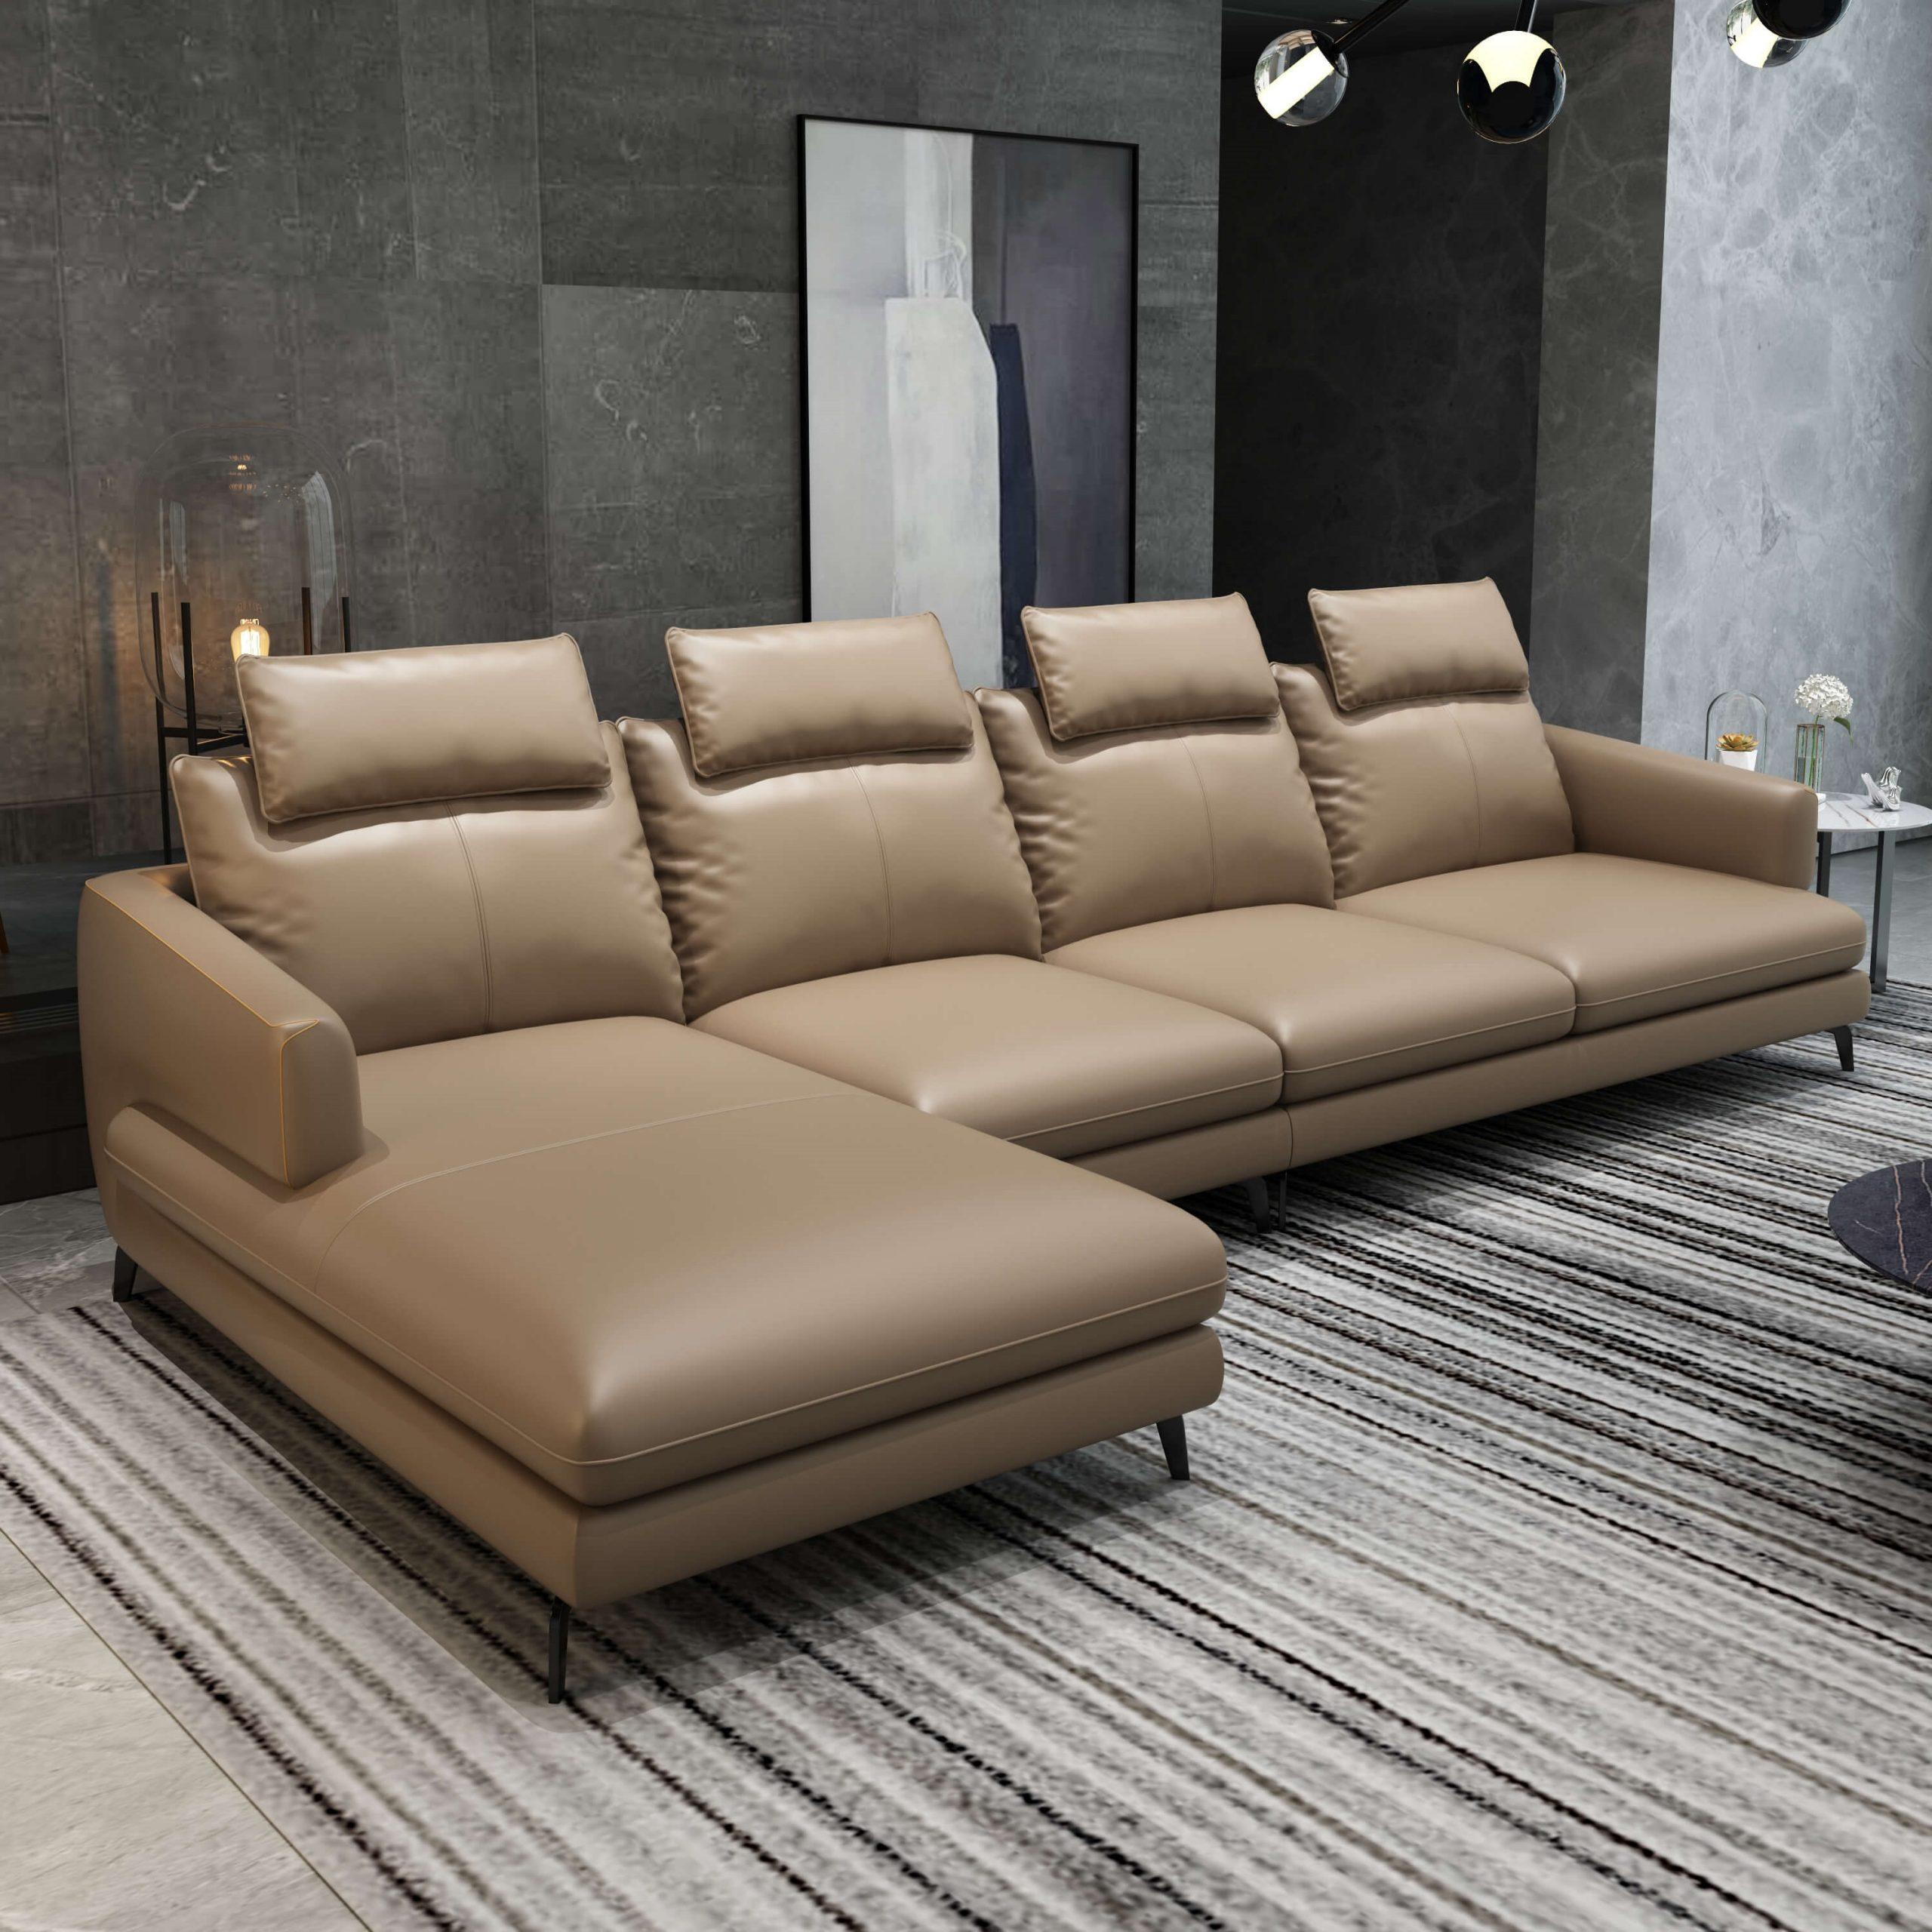 Modern, Vintage 4 Seater Sectional Sofa MARCONI EF-74535L-3LHC in Tan Italian Leather